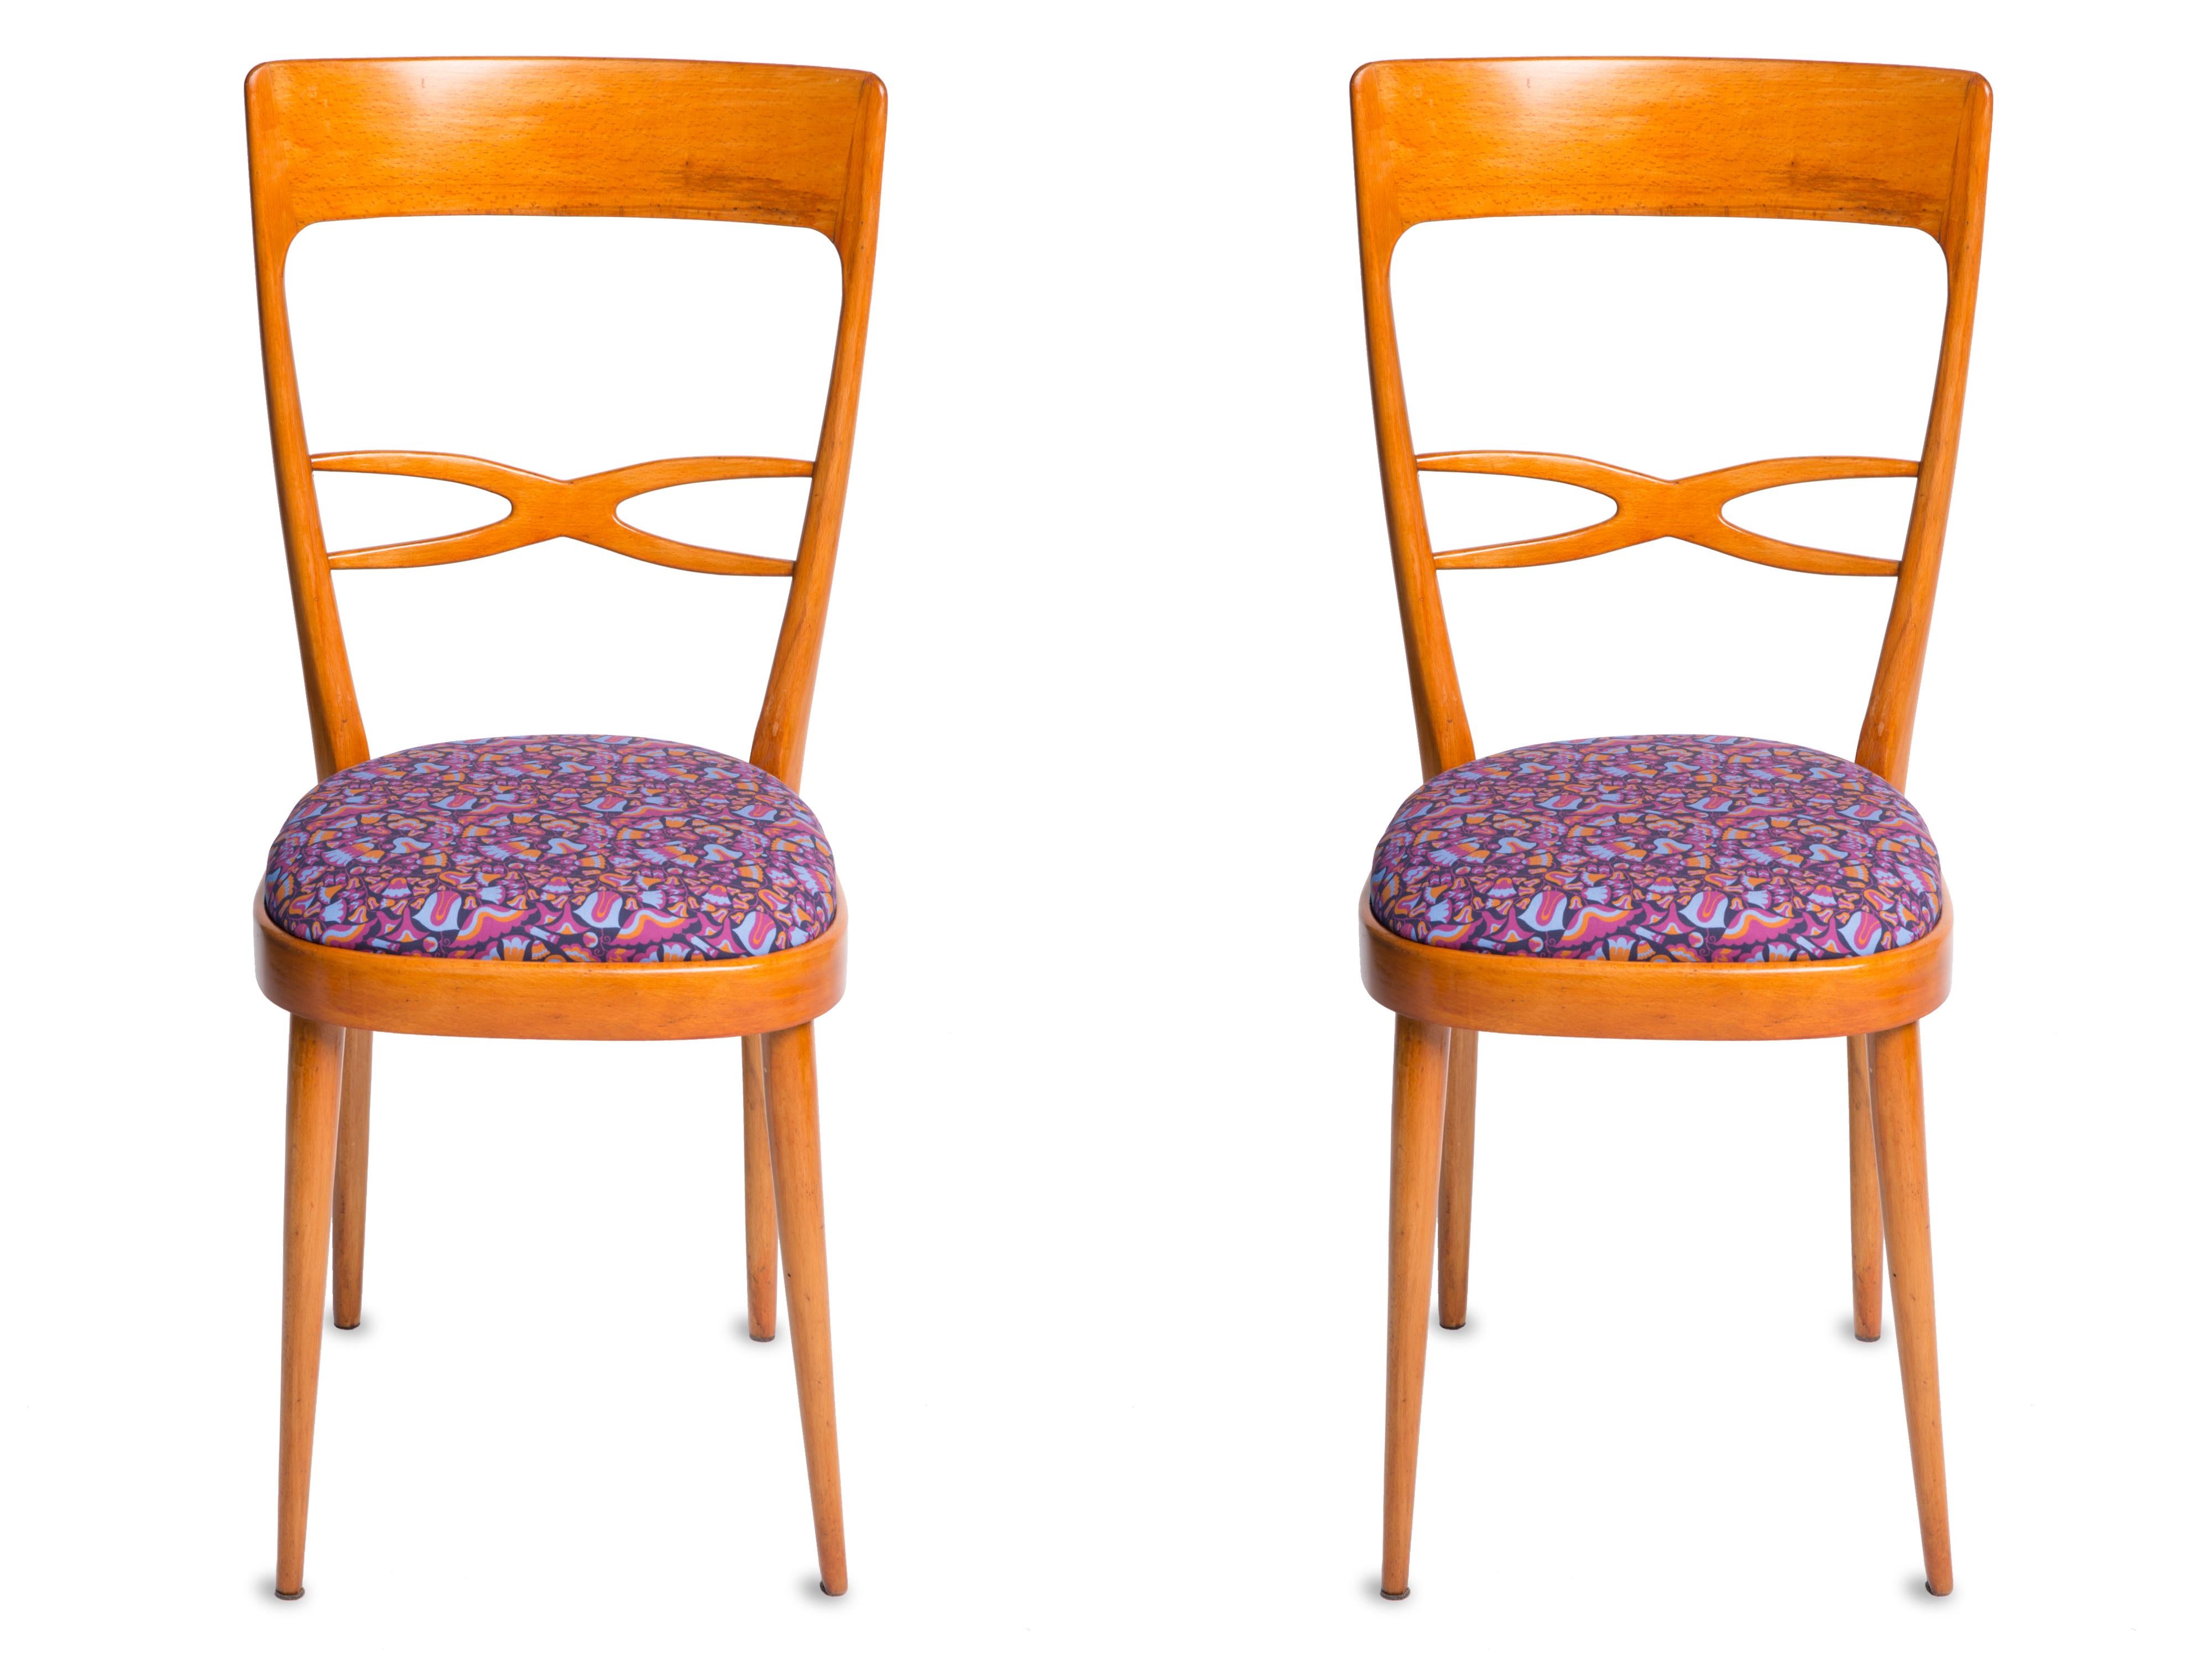 Set of six 1950s Italian chairs in the style of Melchiorre Bega, featuring varnished birch wood and newly upholstered seats. All six chairs were sourced in Milan by LaDoubleJ: two chairs feature the brand’s re-issued vintage Tulipani fabric, while